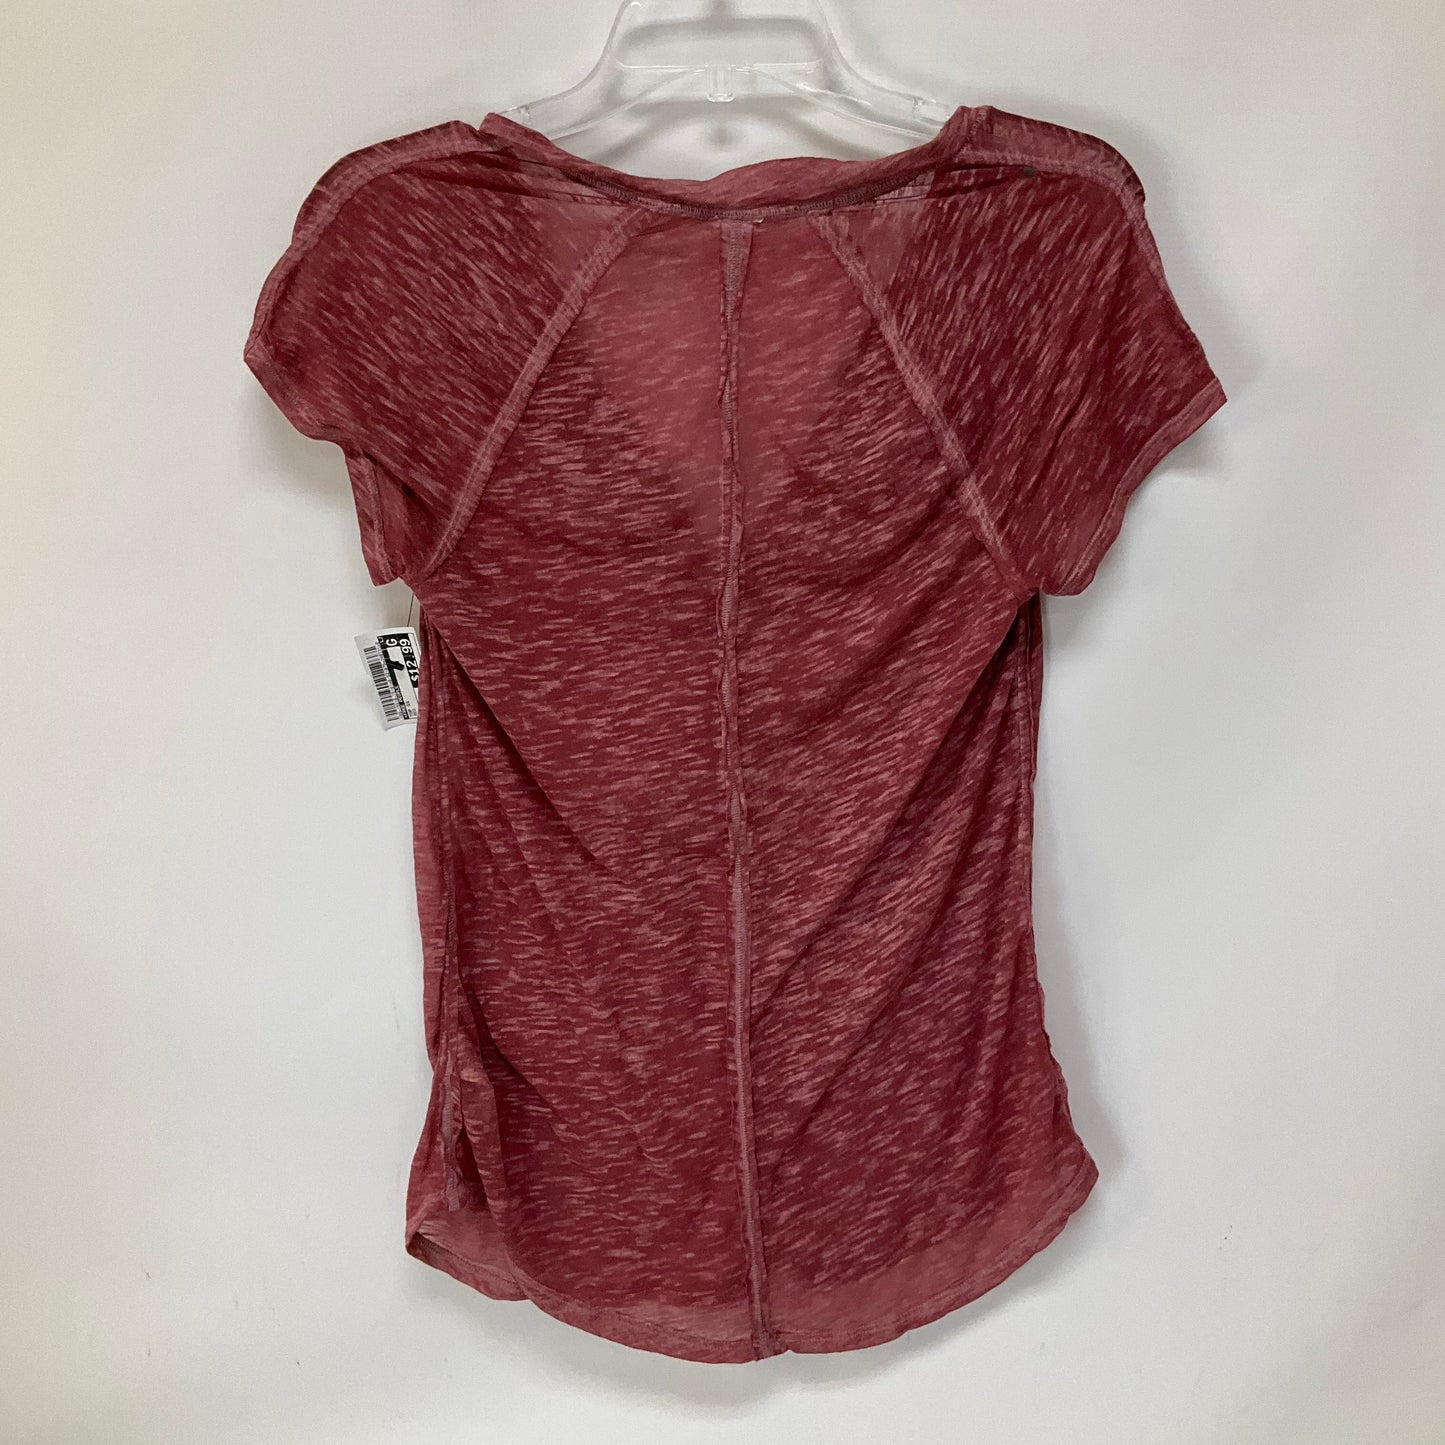 Red Top Short Sleeve Free People, Size S